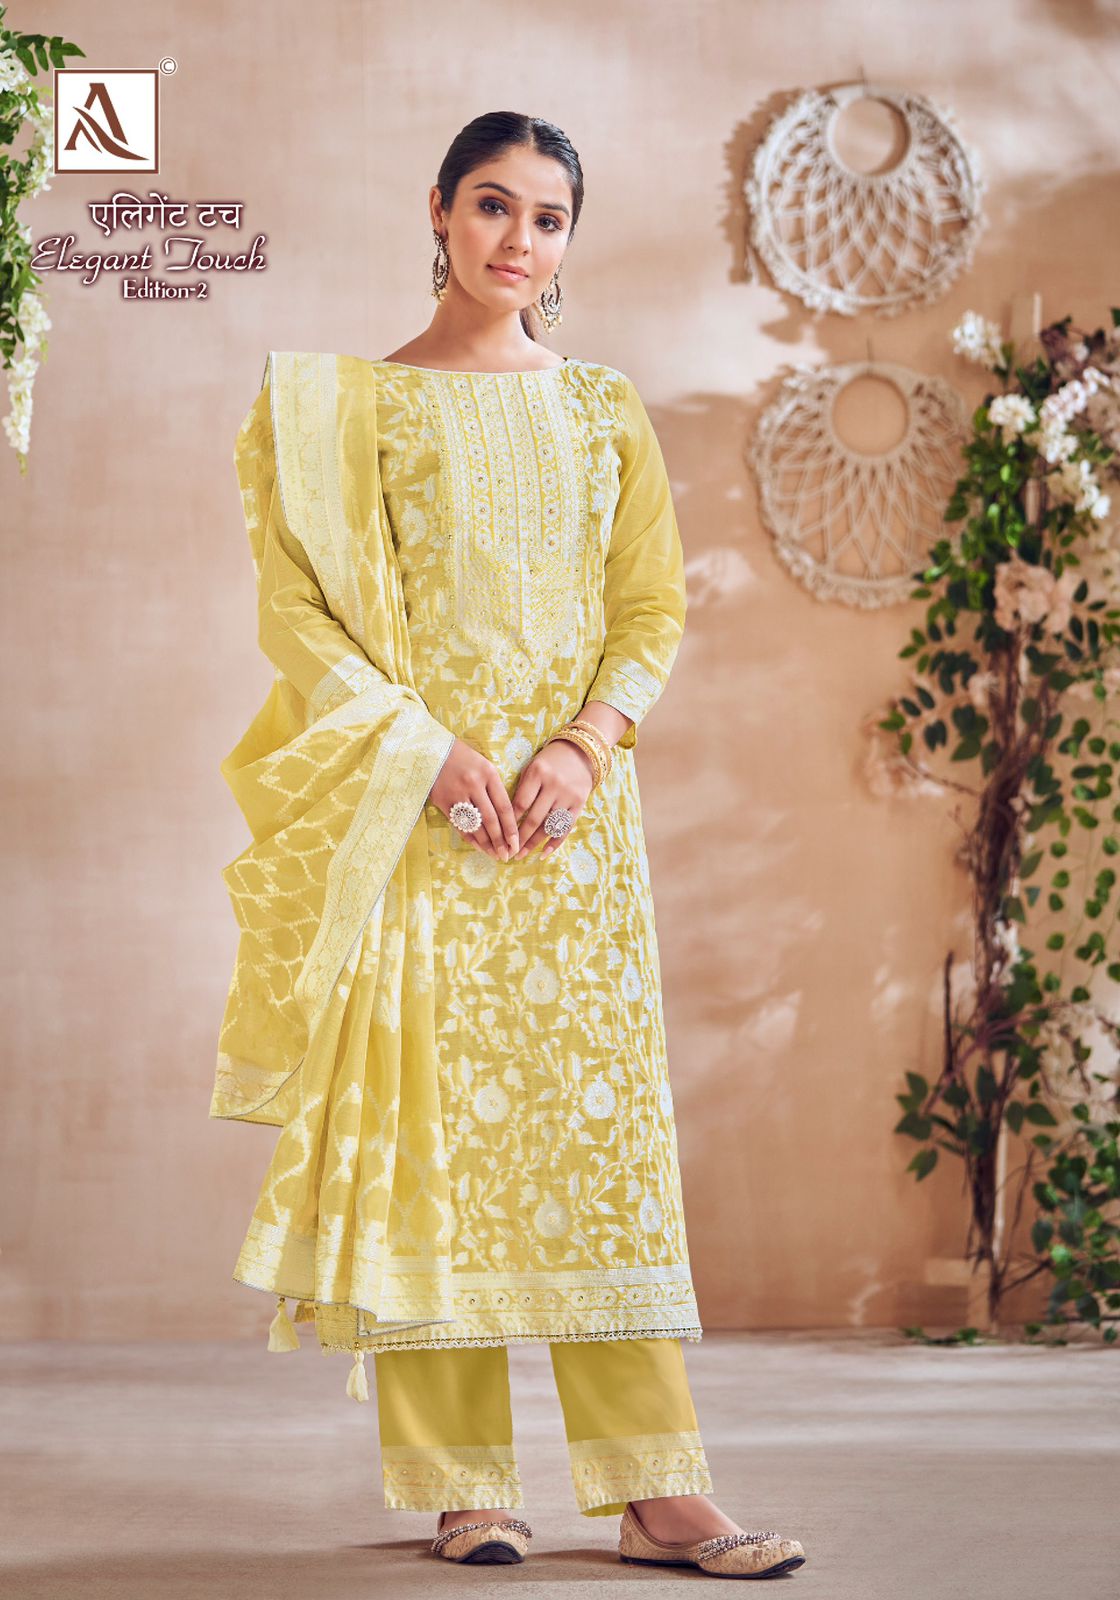 Alok Elegant Touch Vol 2 collection 3